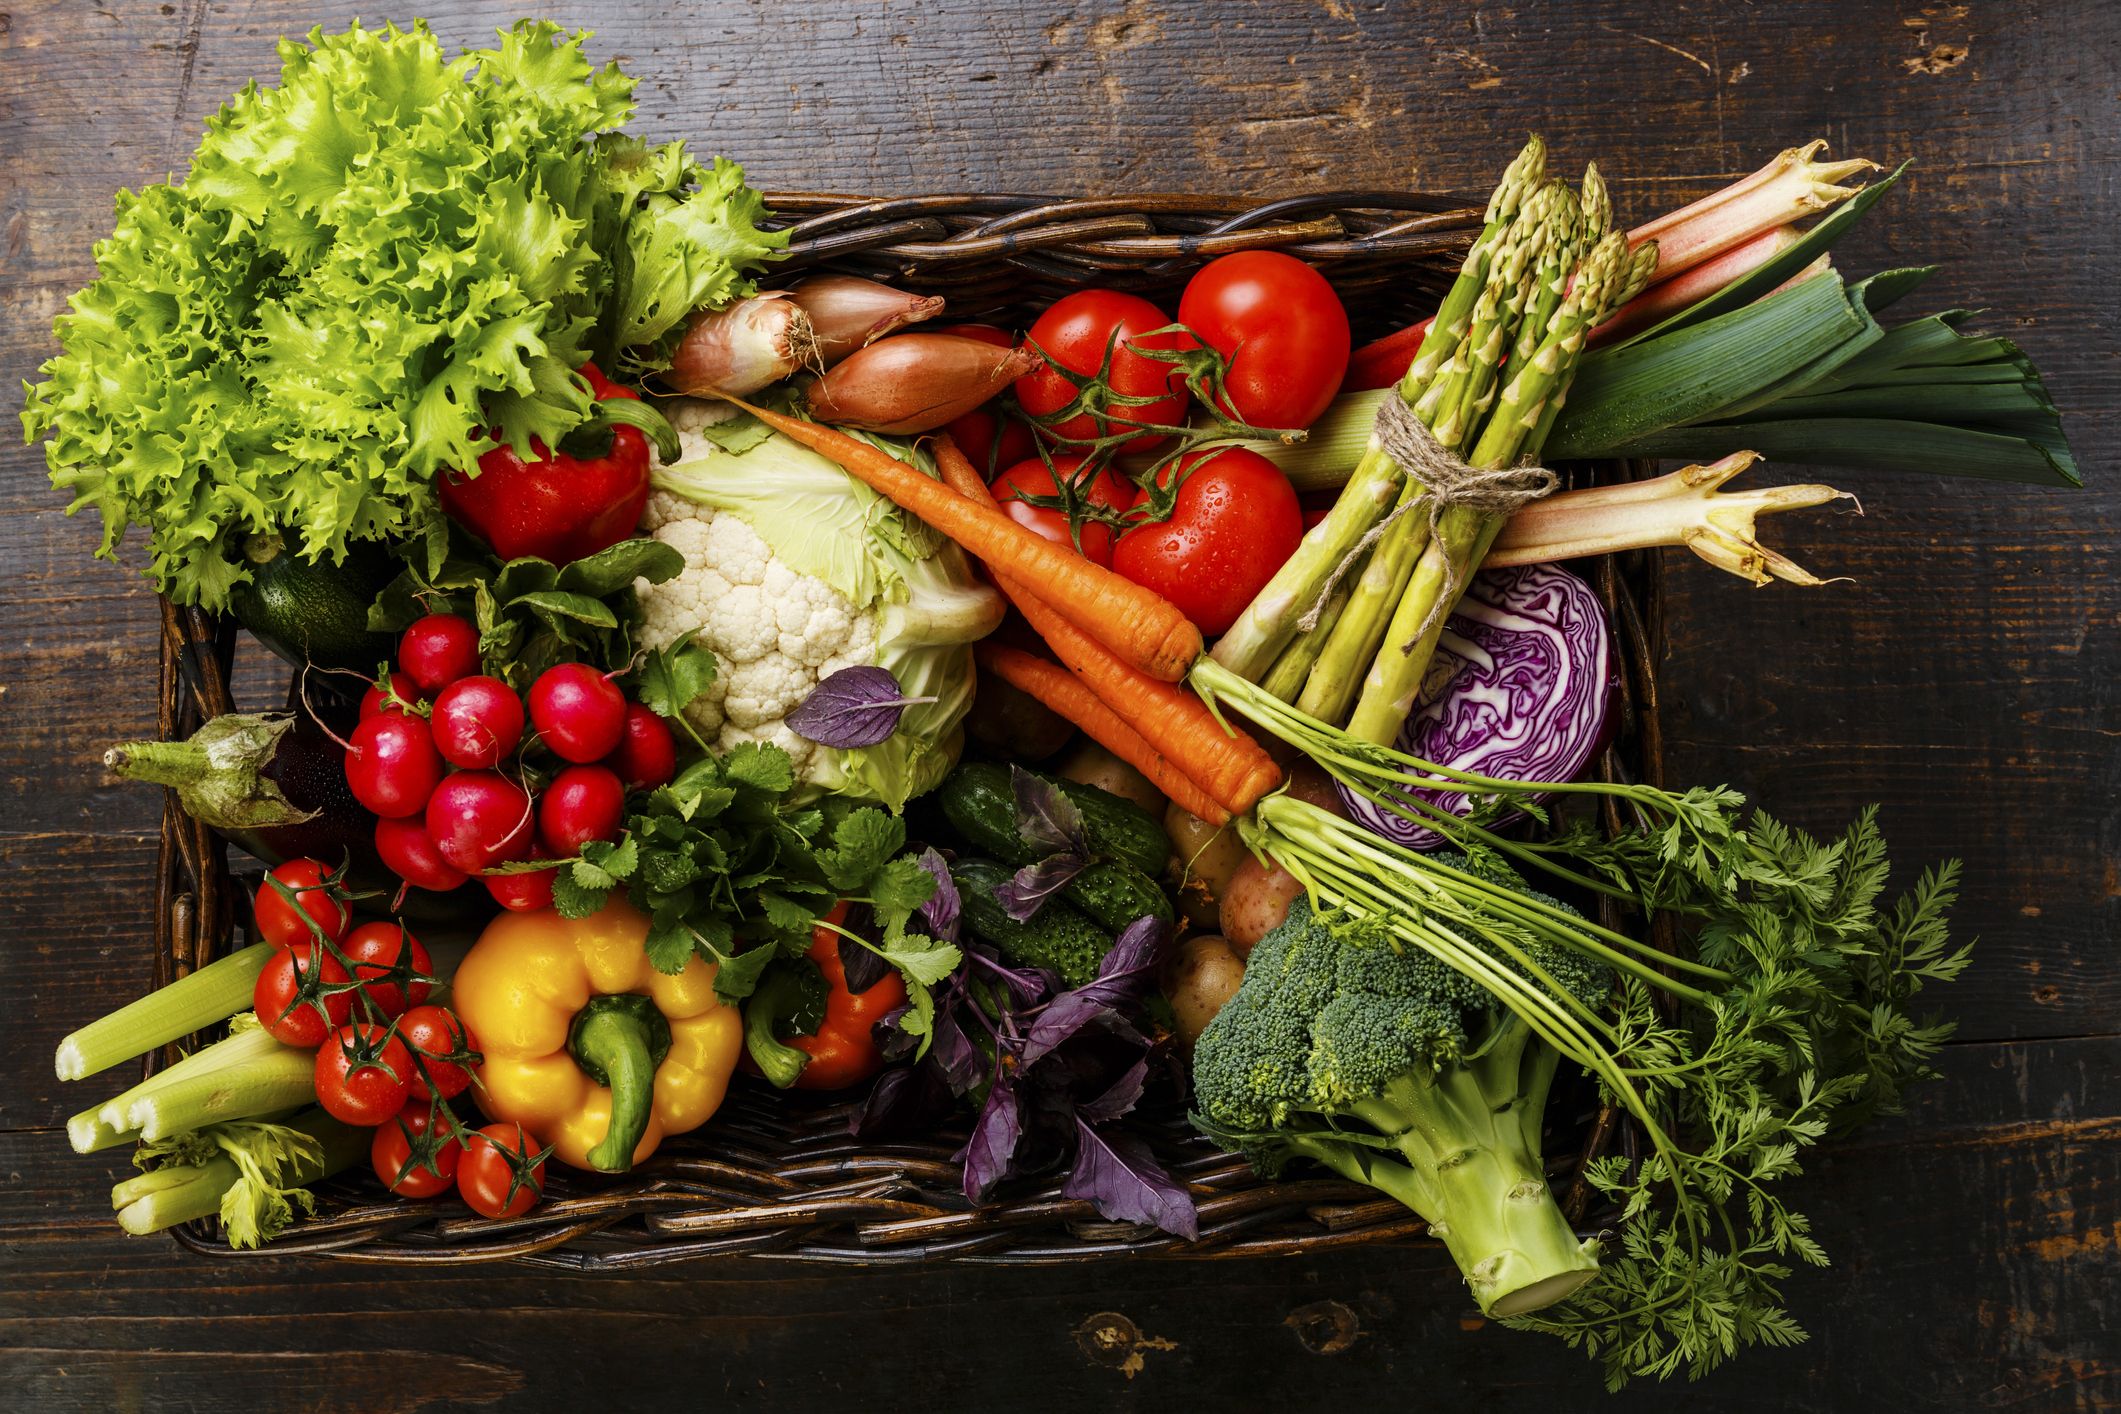 15 Healthiest Vegetables To Eat, According To Nutritionists